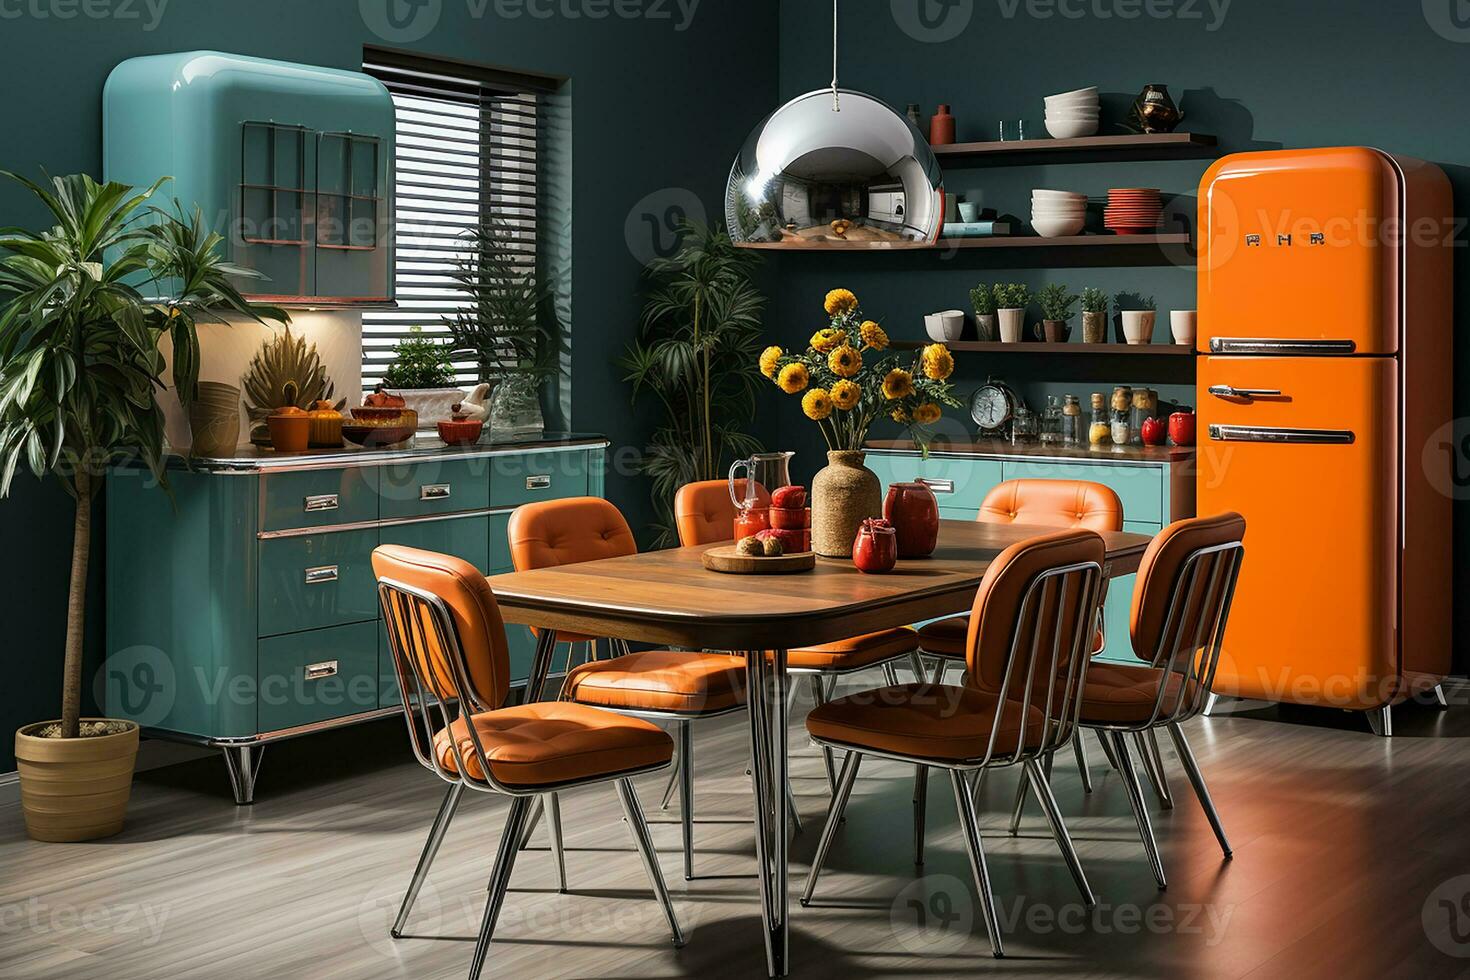 AI generated kitchen midcentury modern design, characterized by clean lines and iconic shapes, bright color from 60s and 70s photo